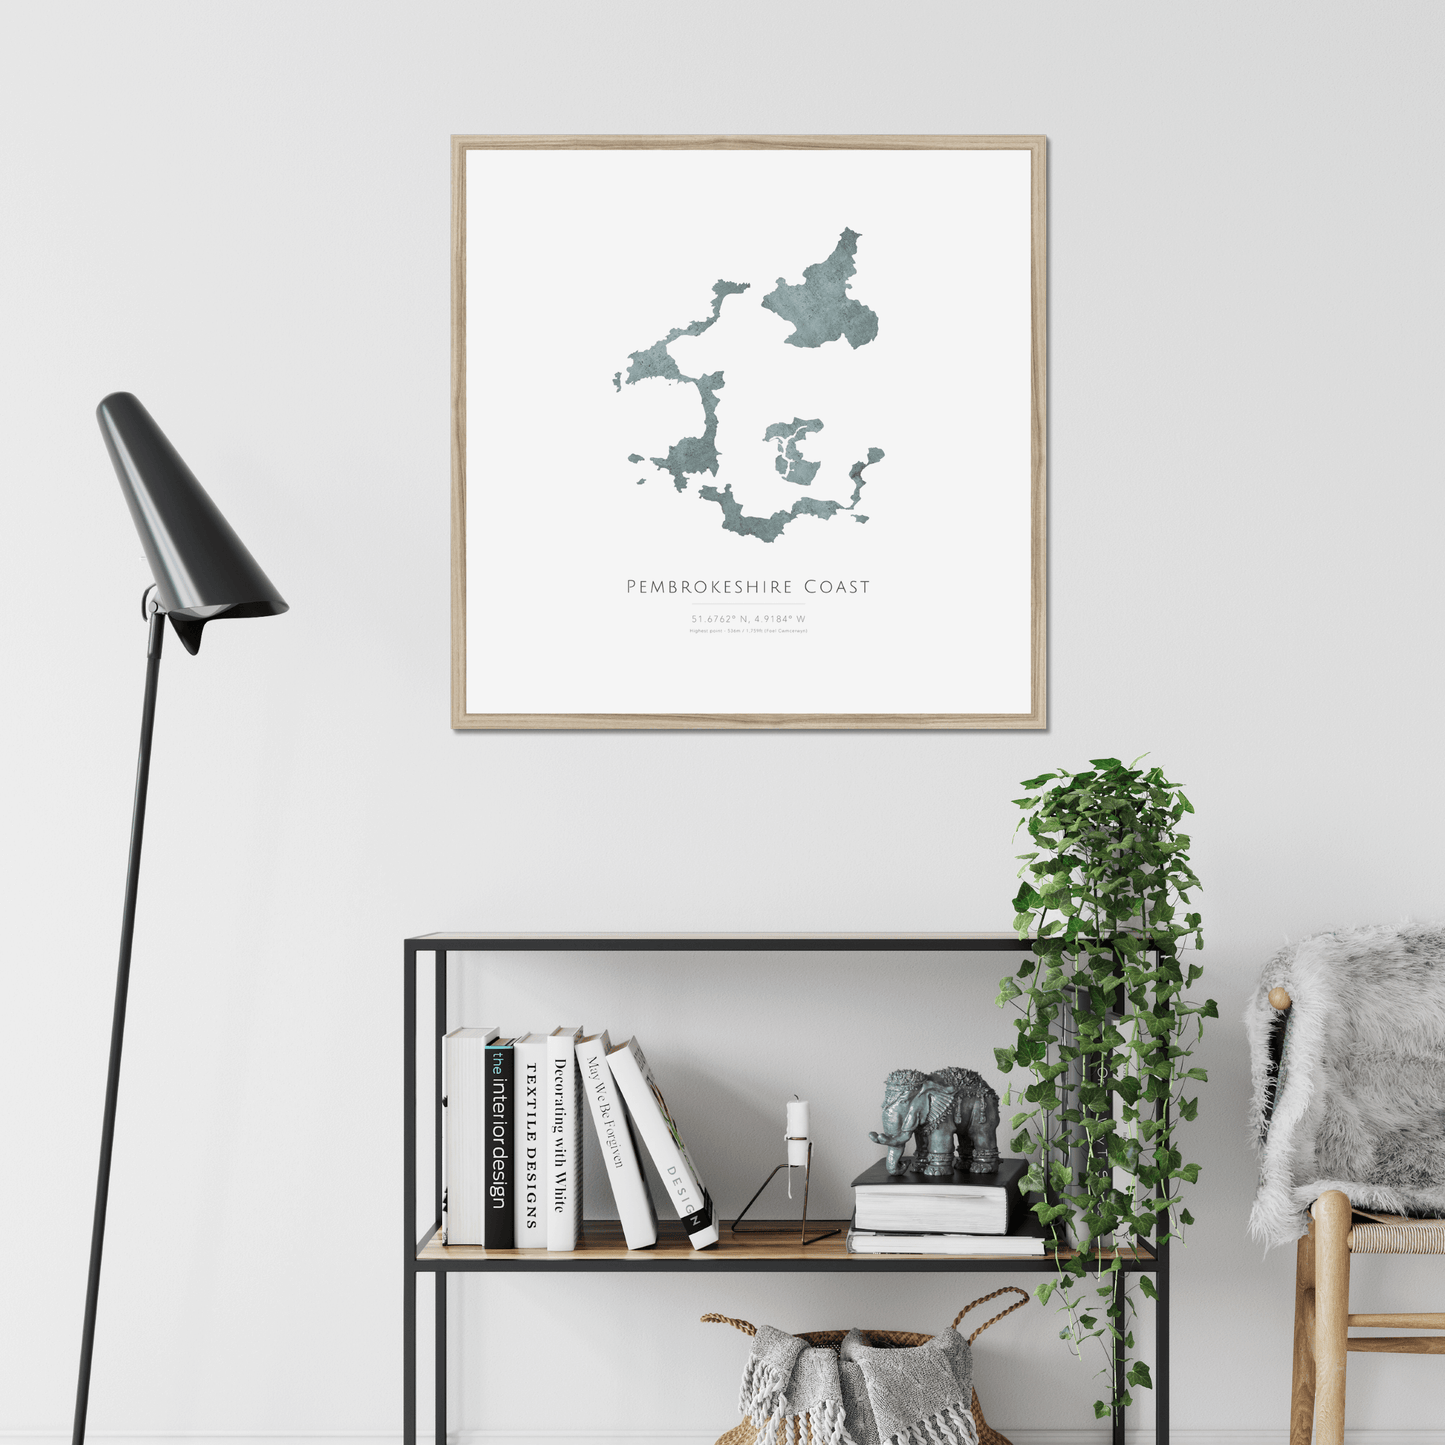 Pembrokeshire Coast -  Framed & Mounted Map